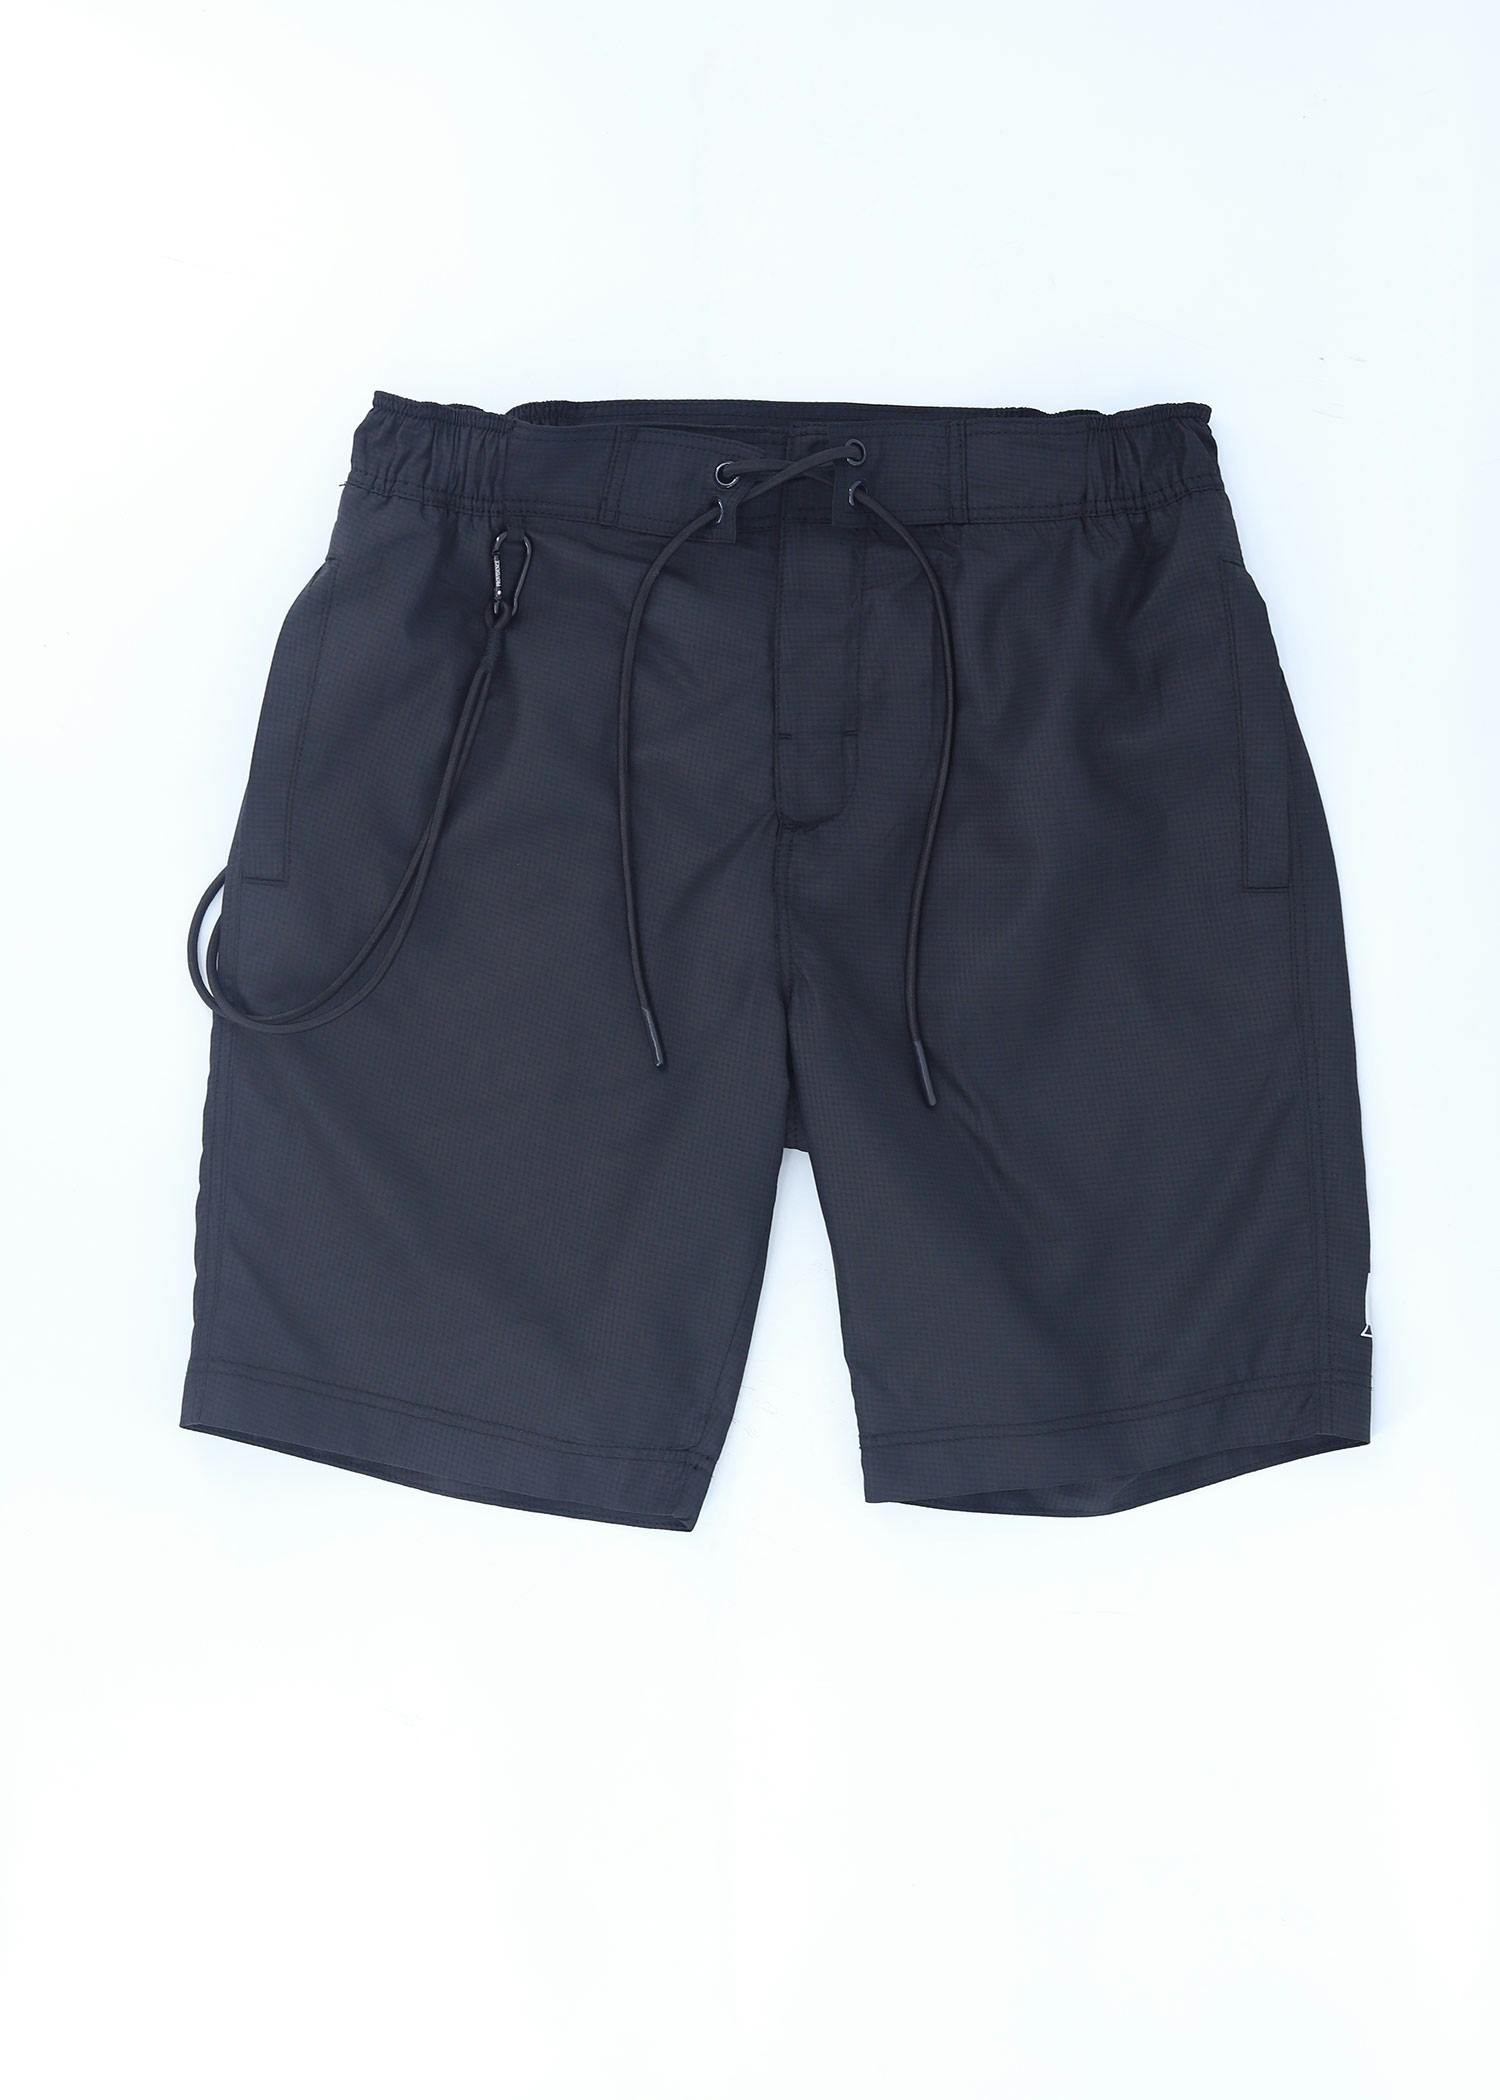 laridae i short black color front view